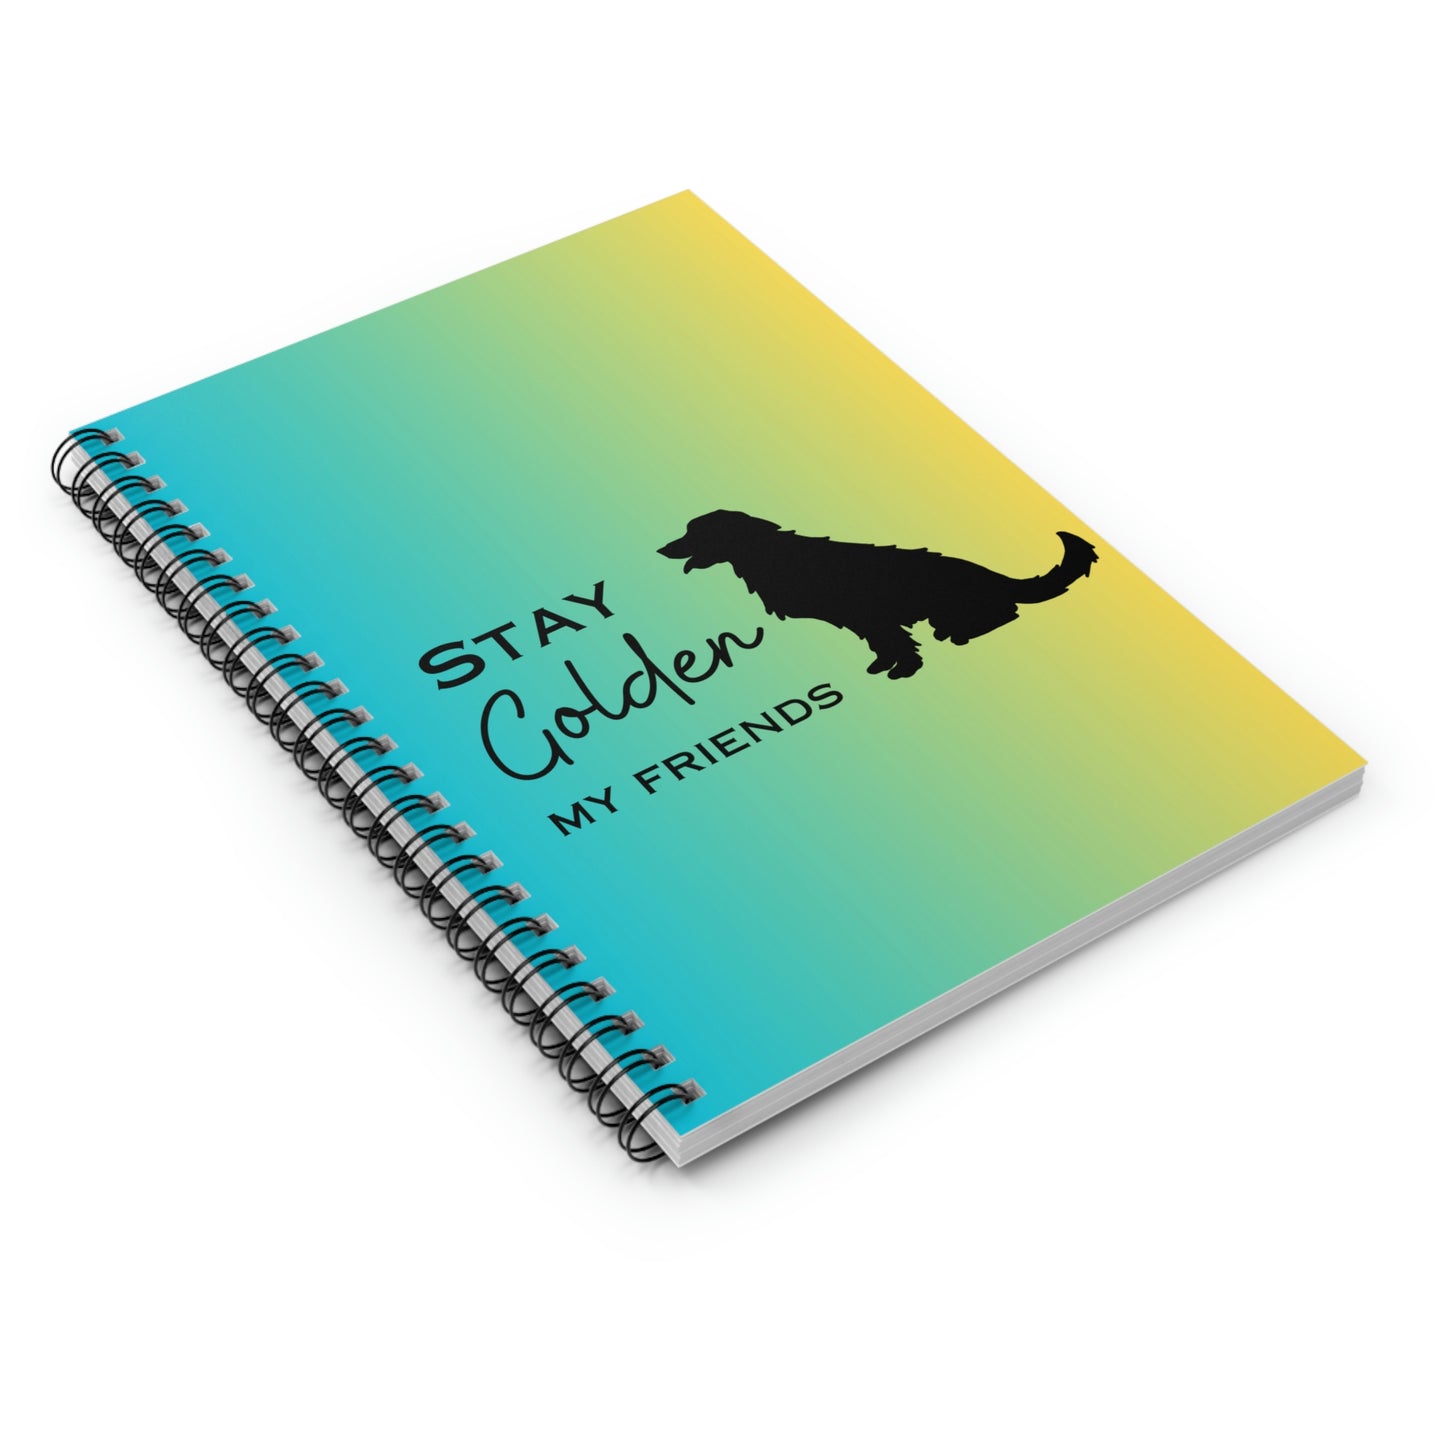 Stay Golden My Friends Spiral Notebook (Green/Yellow Ombre) - Ruled Line